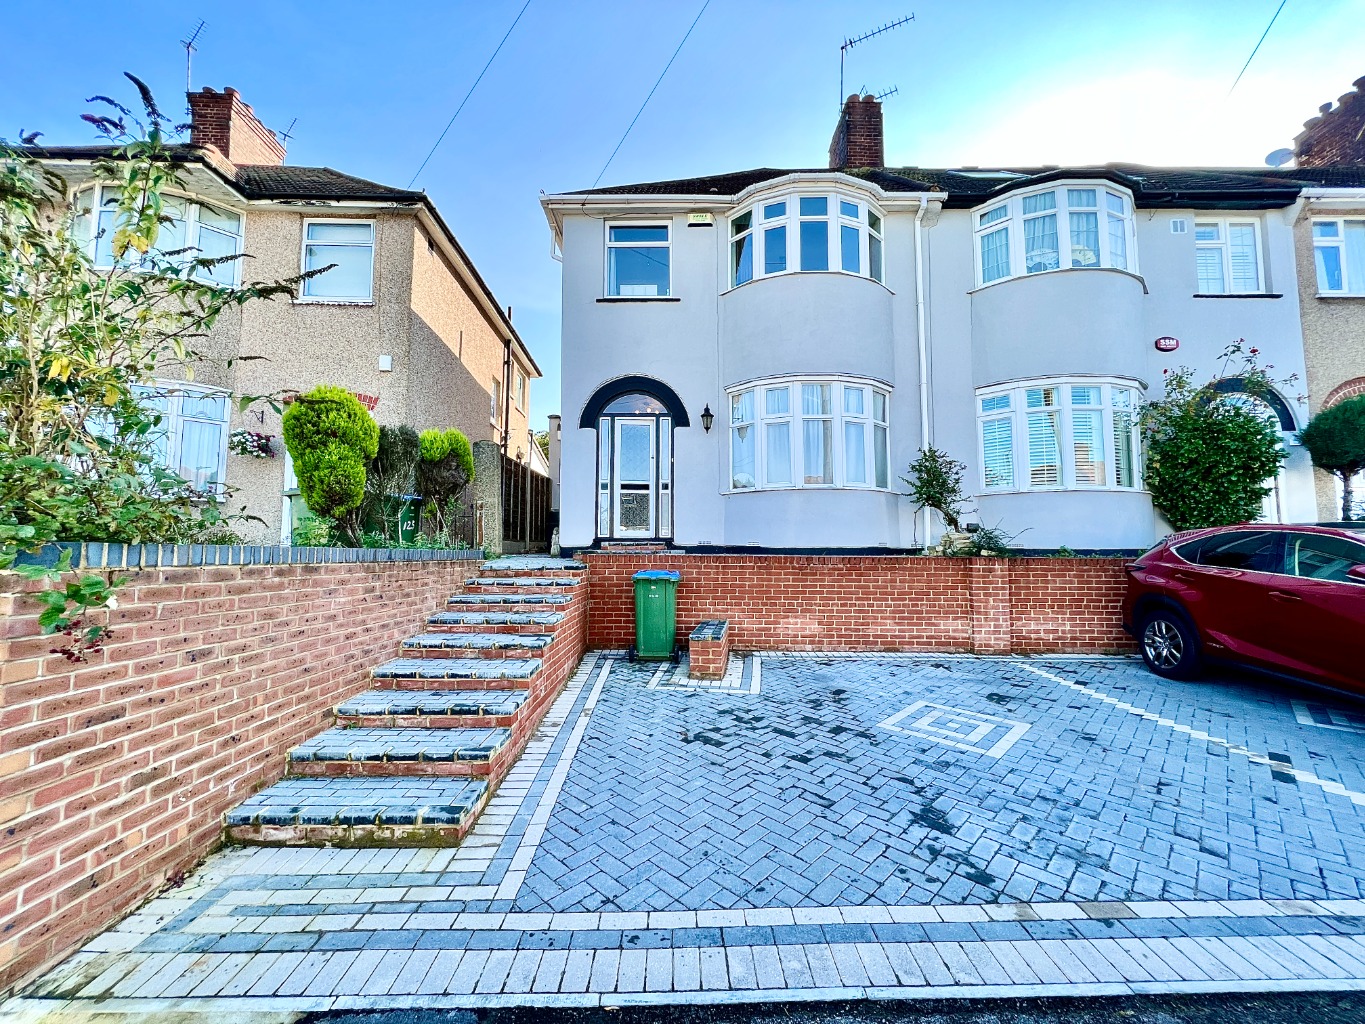 Beaumont Gibbs are offering this super extended three bedroomed end of terrace house for sale. Situated in one of the most popular roads in the Shooters Hill slopes, the property is offered with immediate vacant possession.